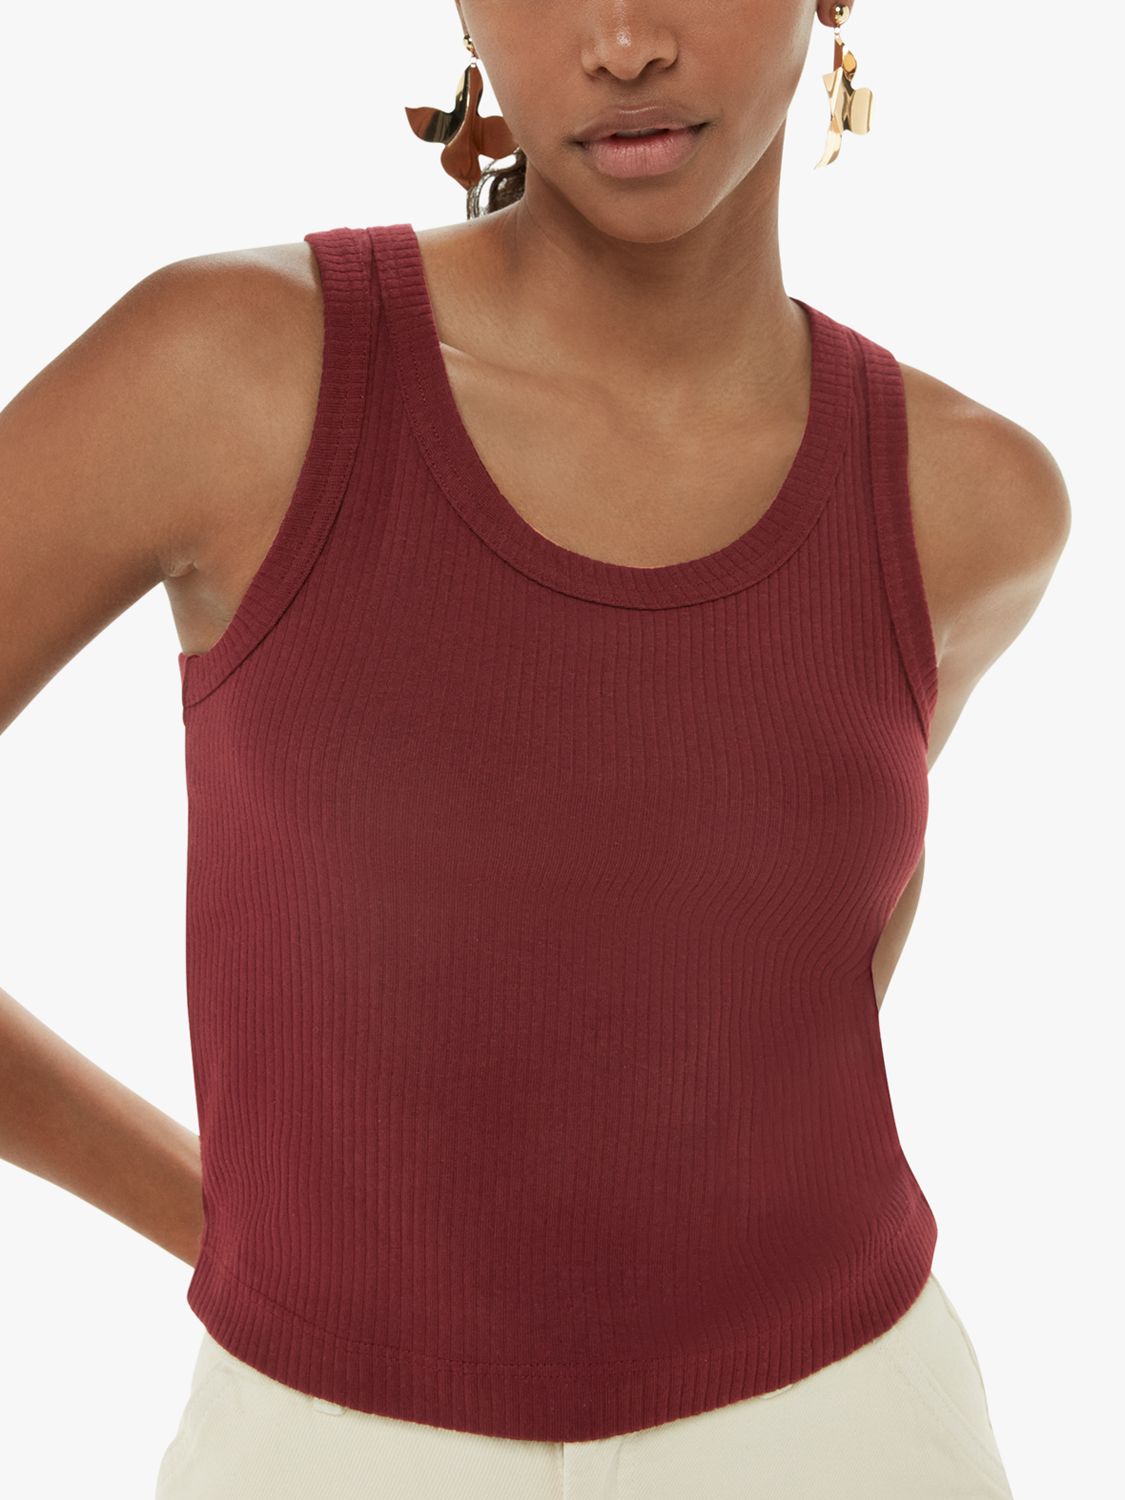 red by BKE Ribbed High Neck Tank Top - Women's Tank Tops in